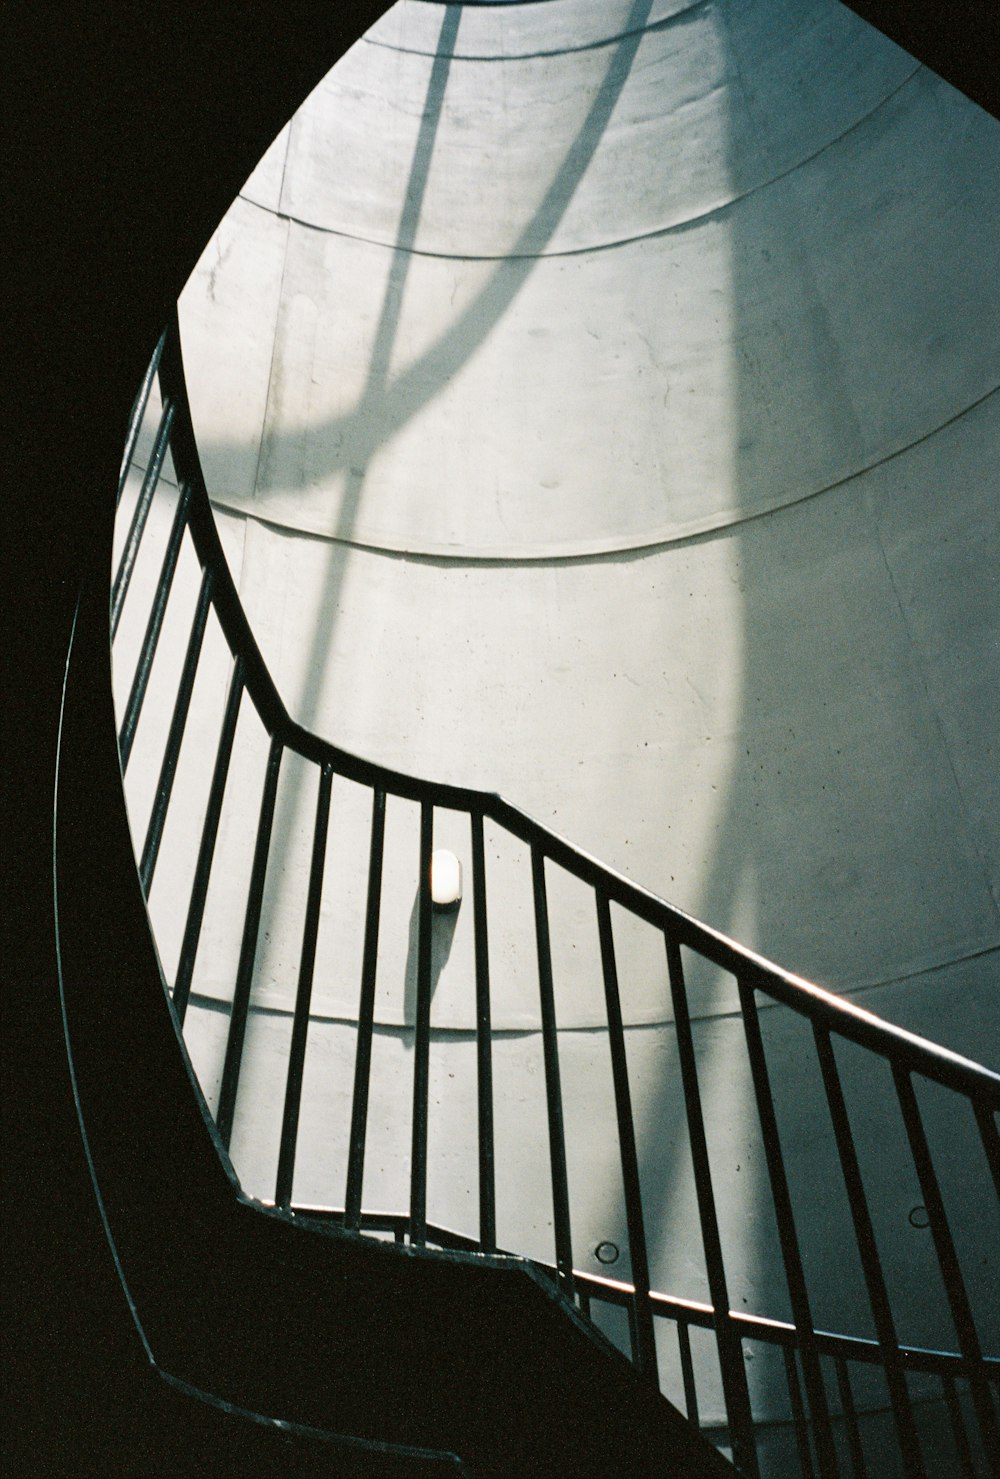 white and brown spiral staircase